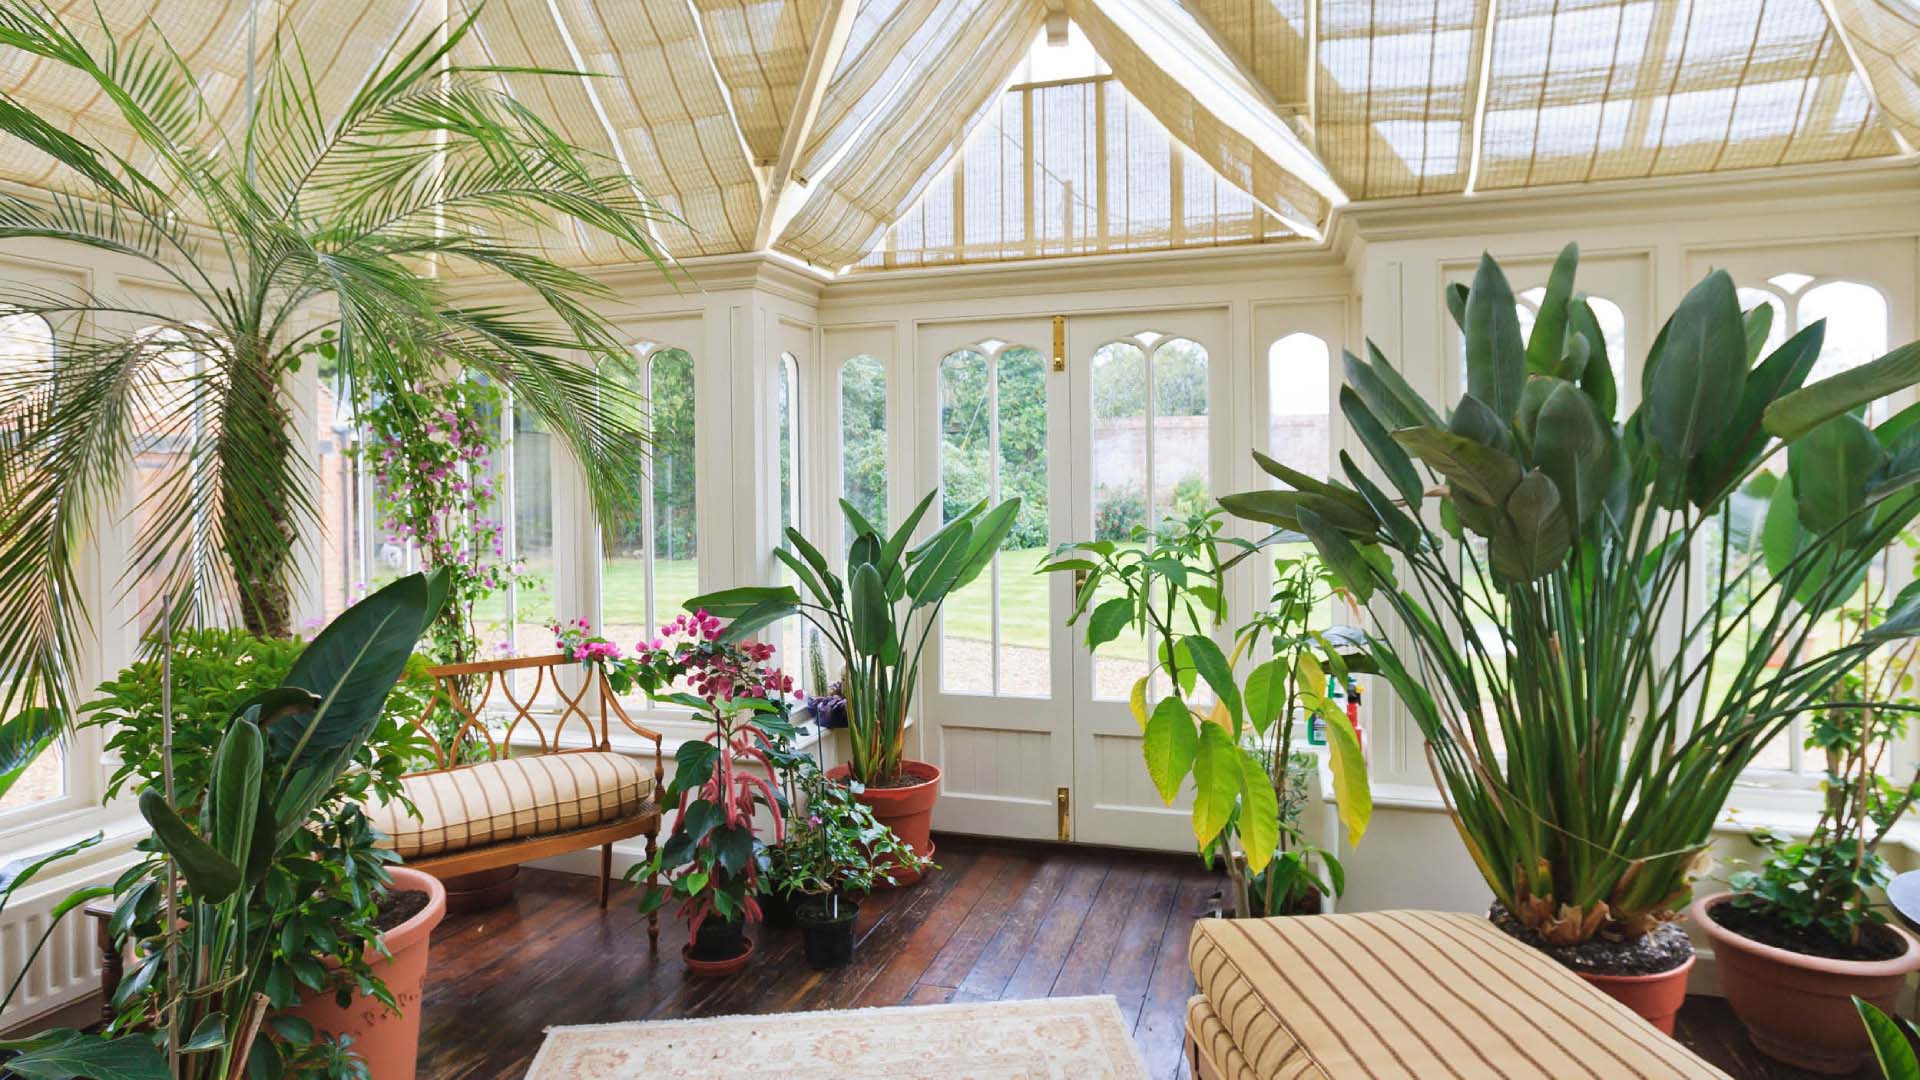 Bring your conservatory to life with foliage